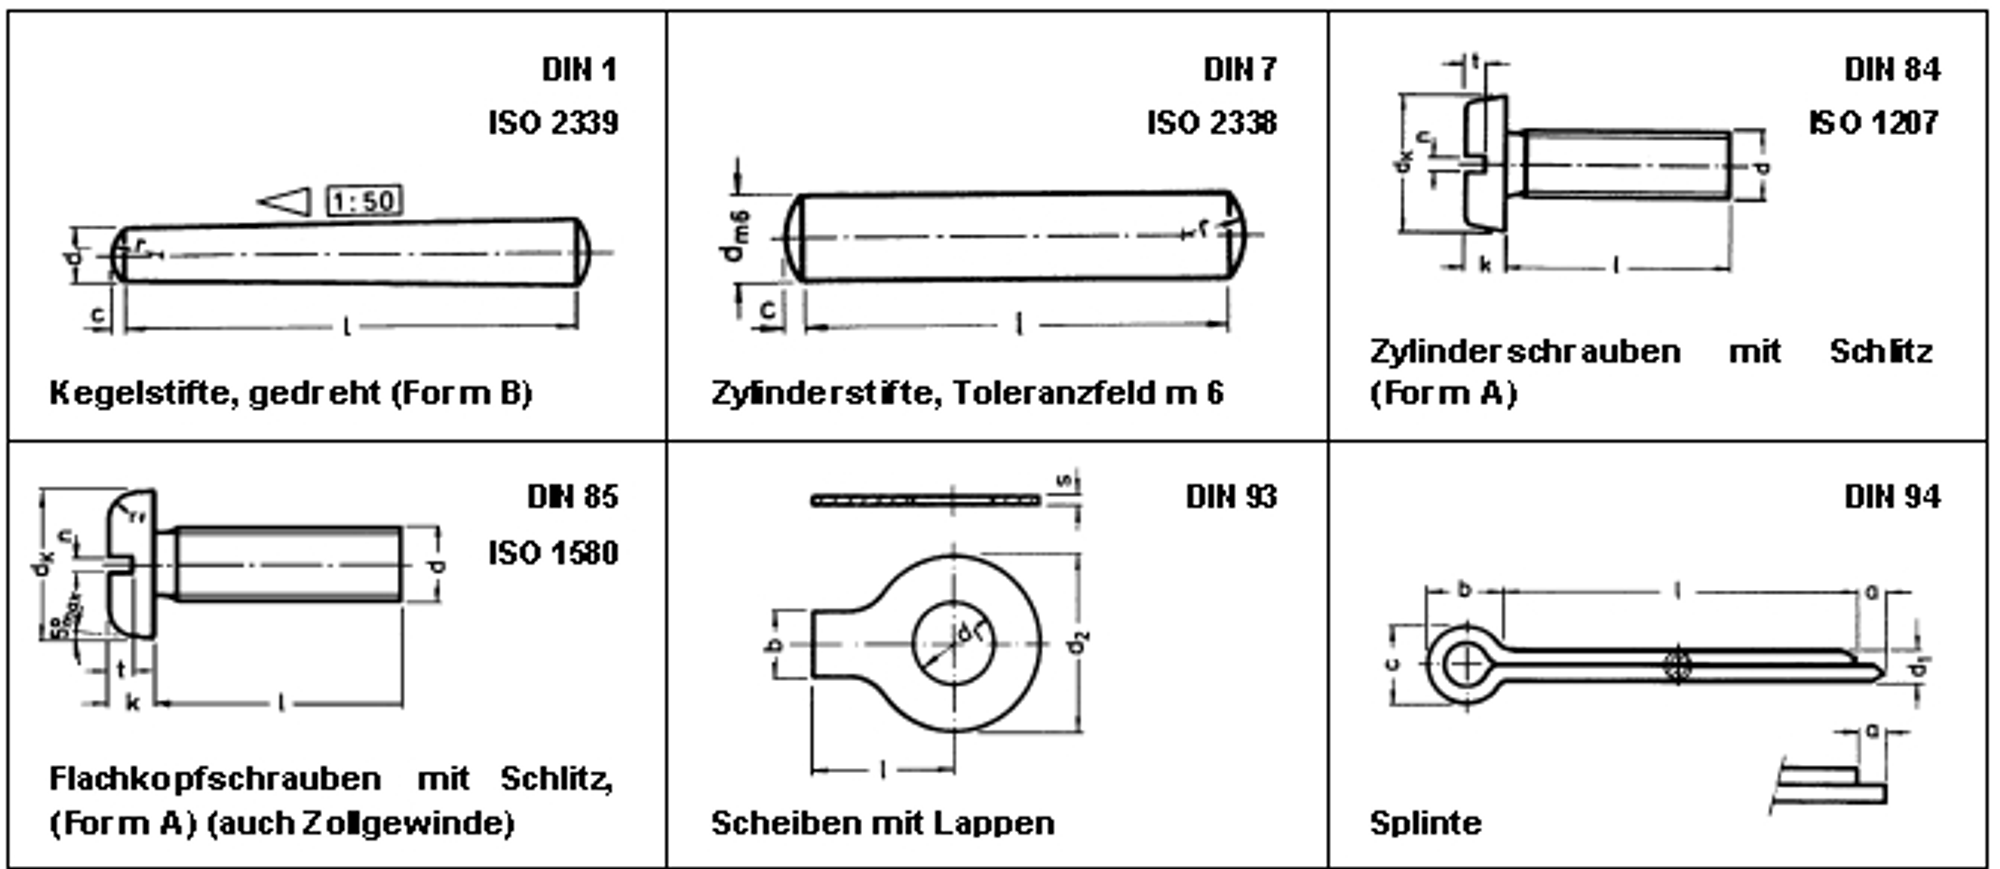 Standards of some metallic products with numbers of DIN and ISO standards